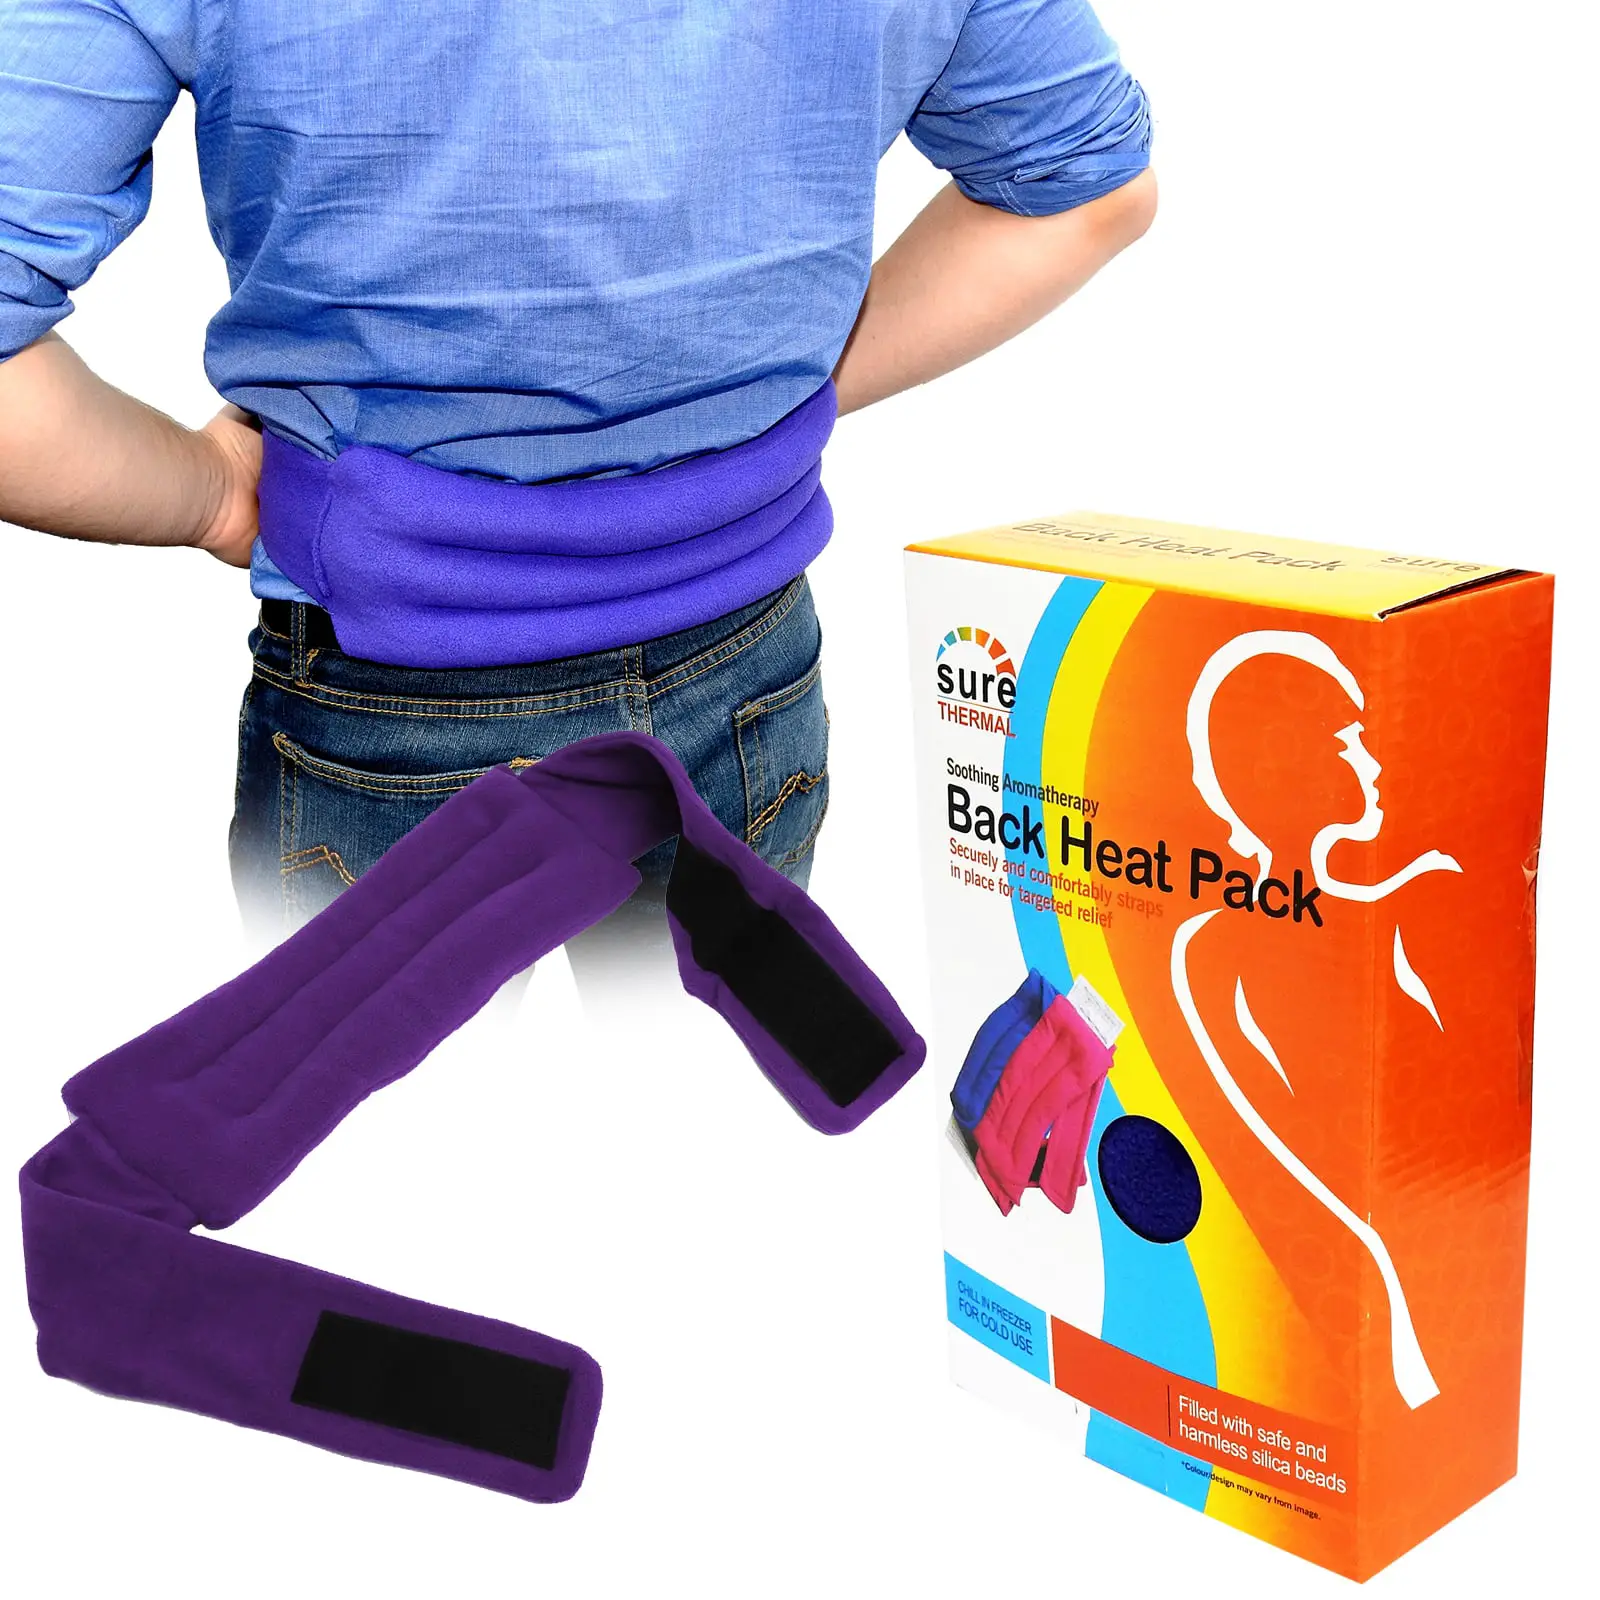 Sure Thermal Lower Back Pain Relieve Hot/Cold Microwaveable Heat Pack ...